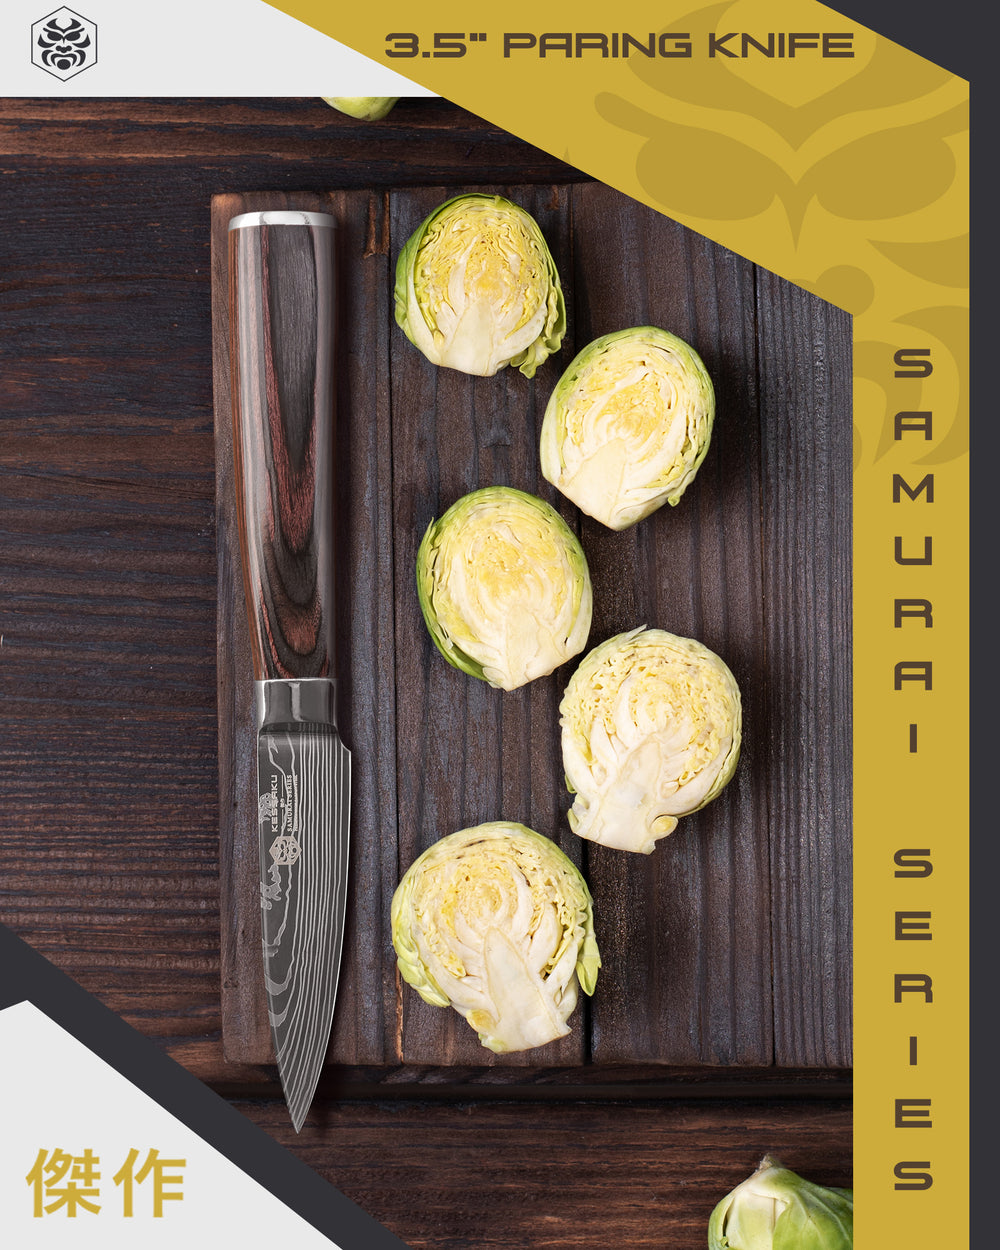 Halved artichokes and the Samurai Paring Knife on a cutting board.